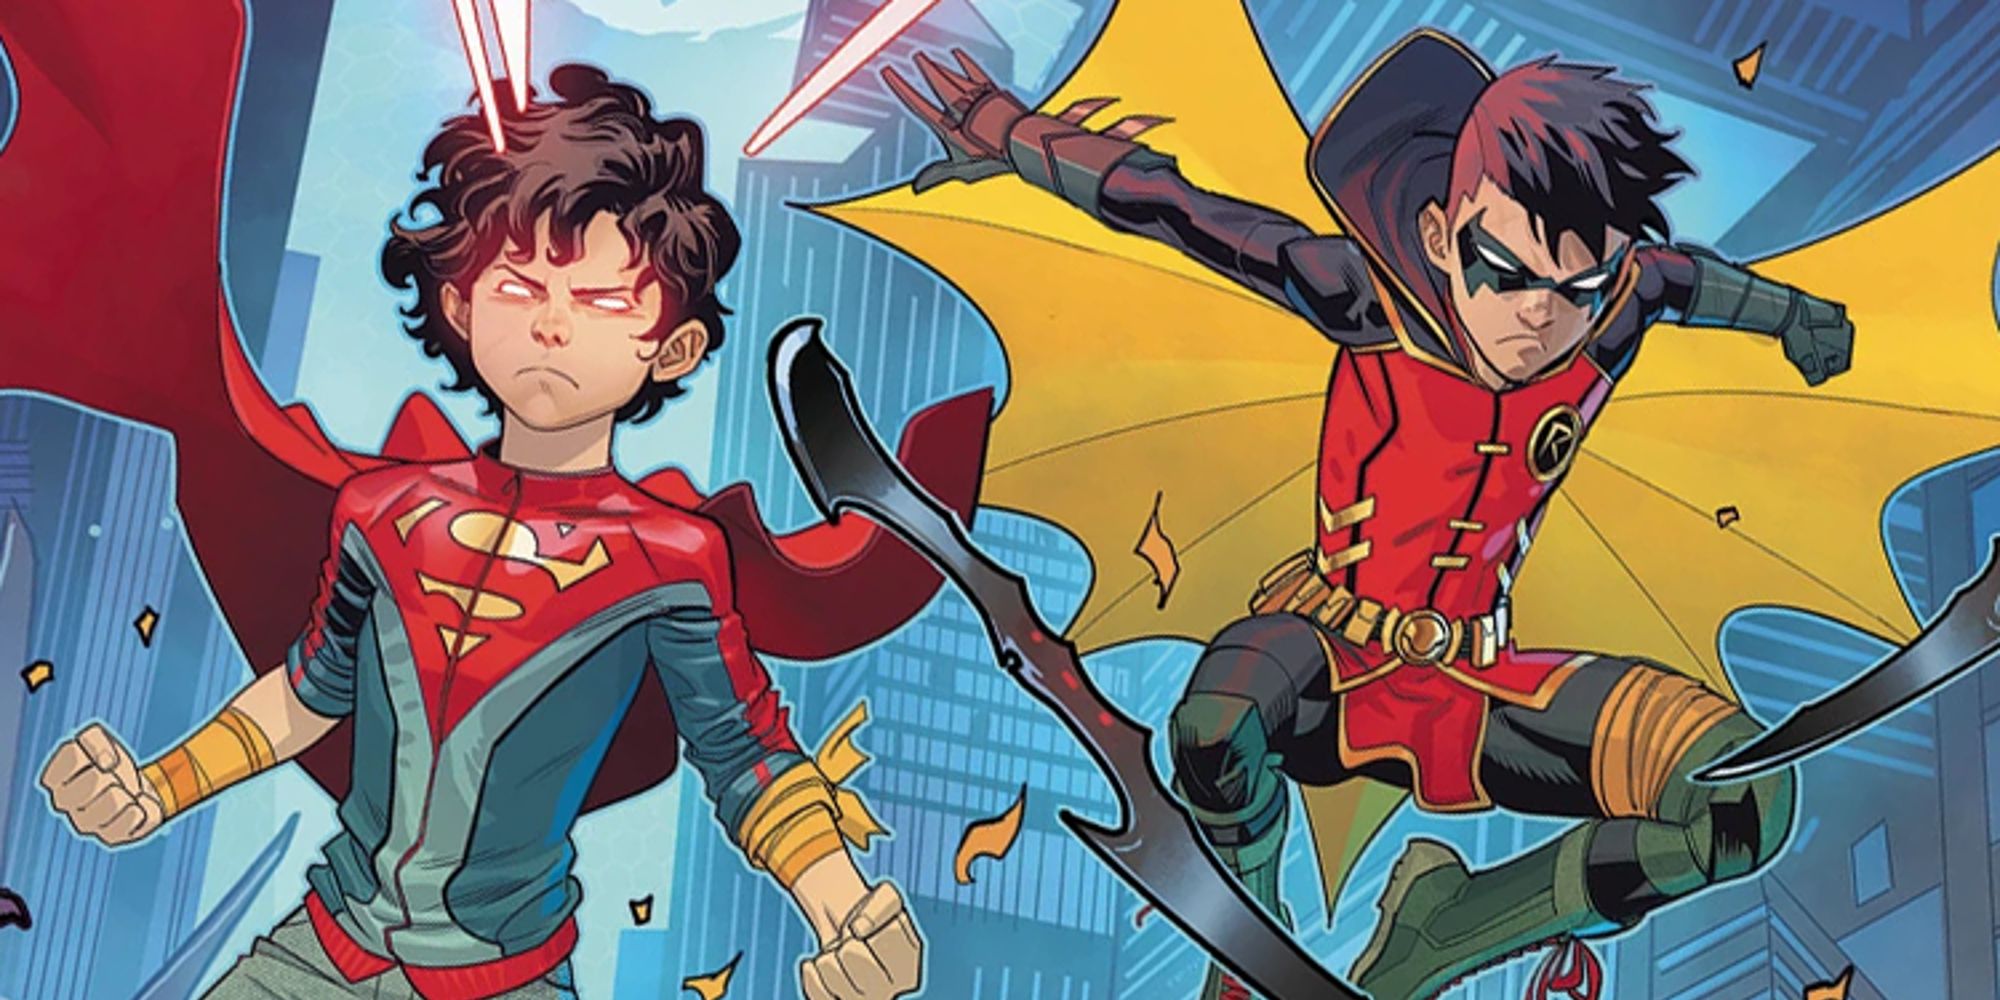 Damian Wayne and Jon Kent leaping into battle as the Supersons